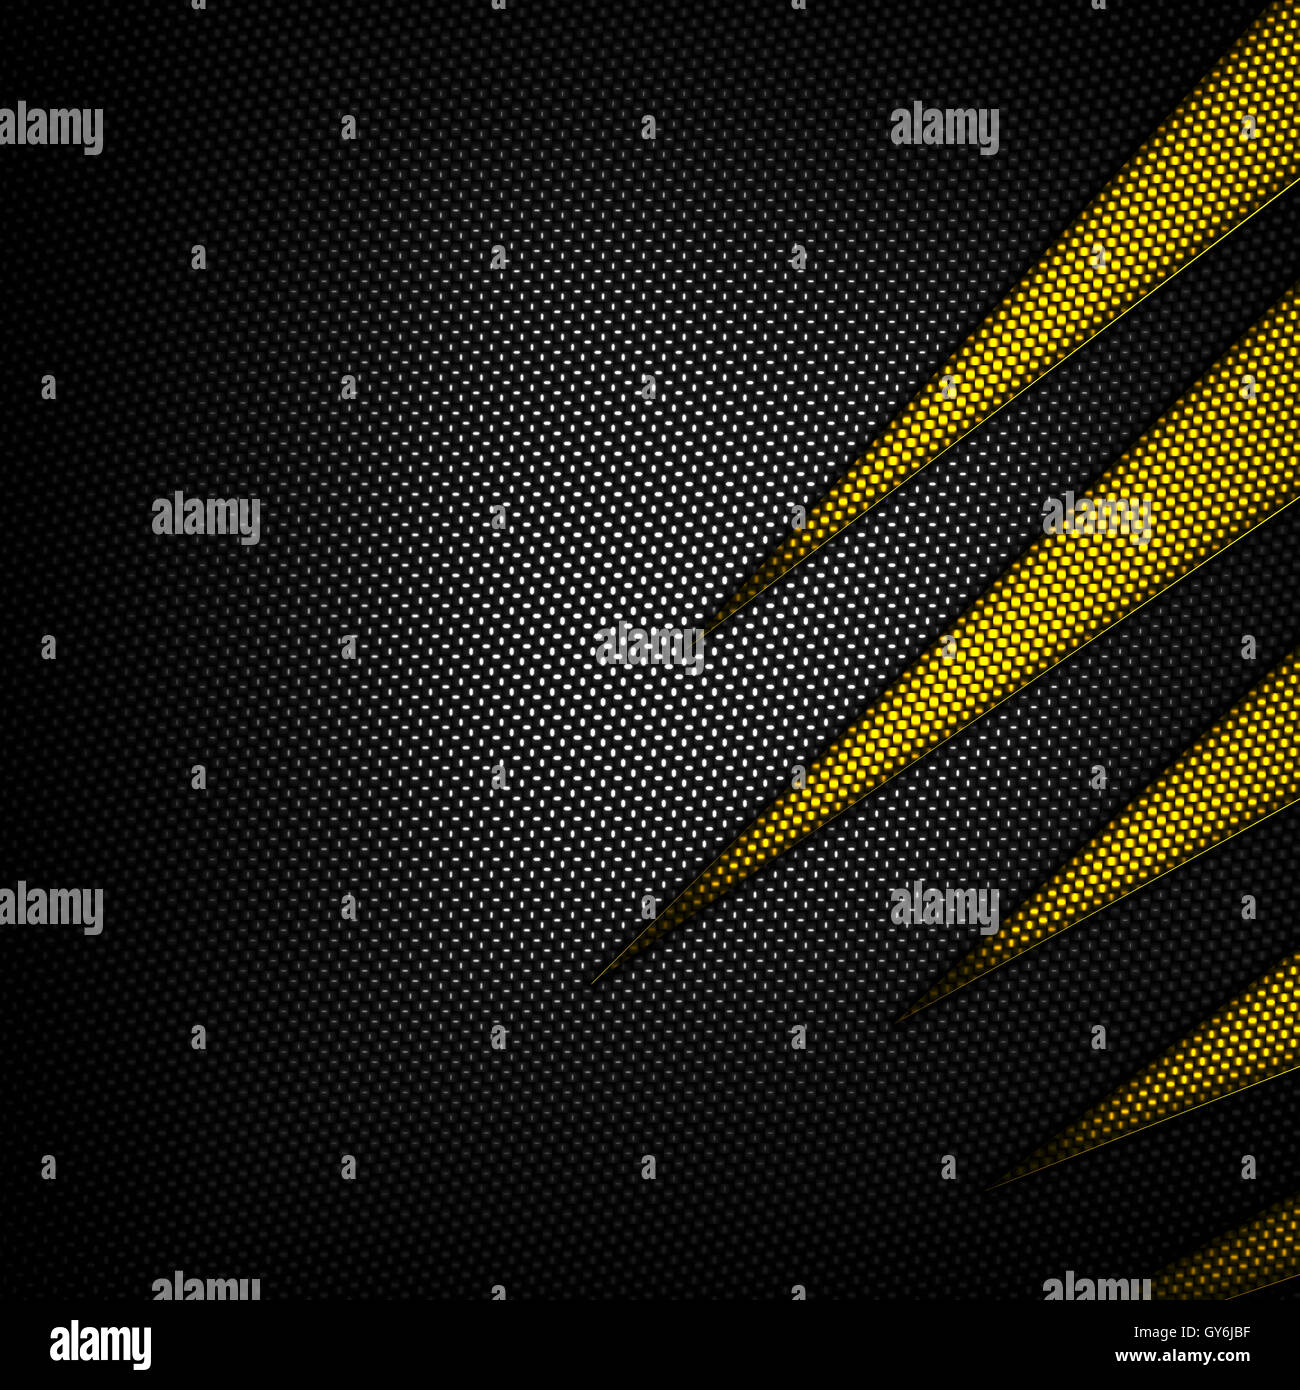 yellow and black carbon fiber background. 3d illustration material design. racing style. Stock Photo